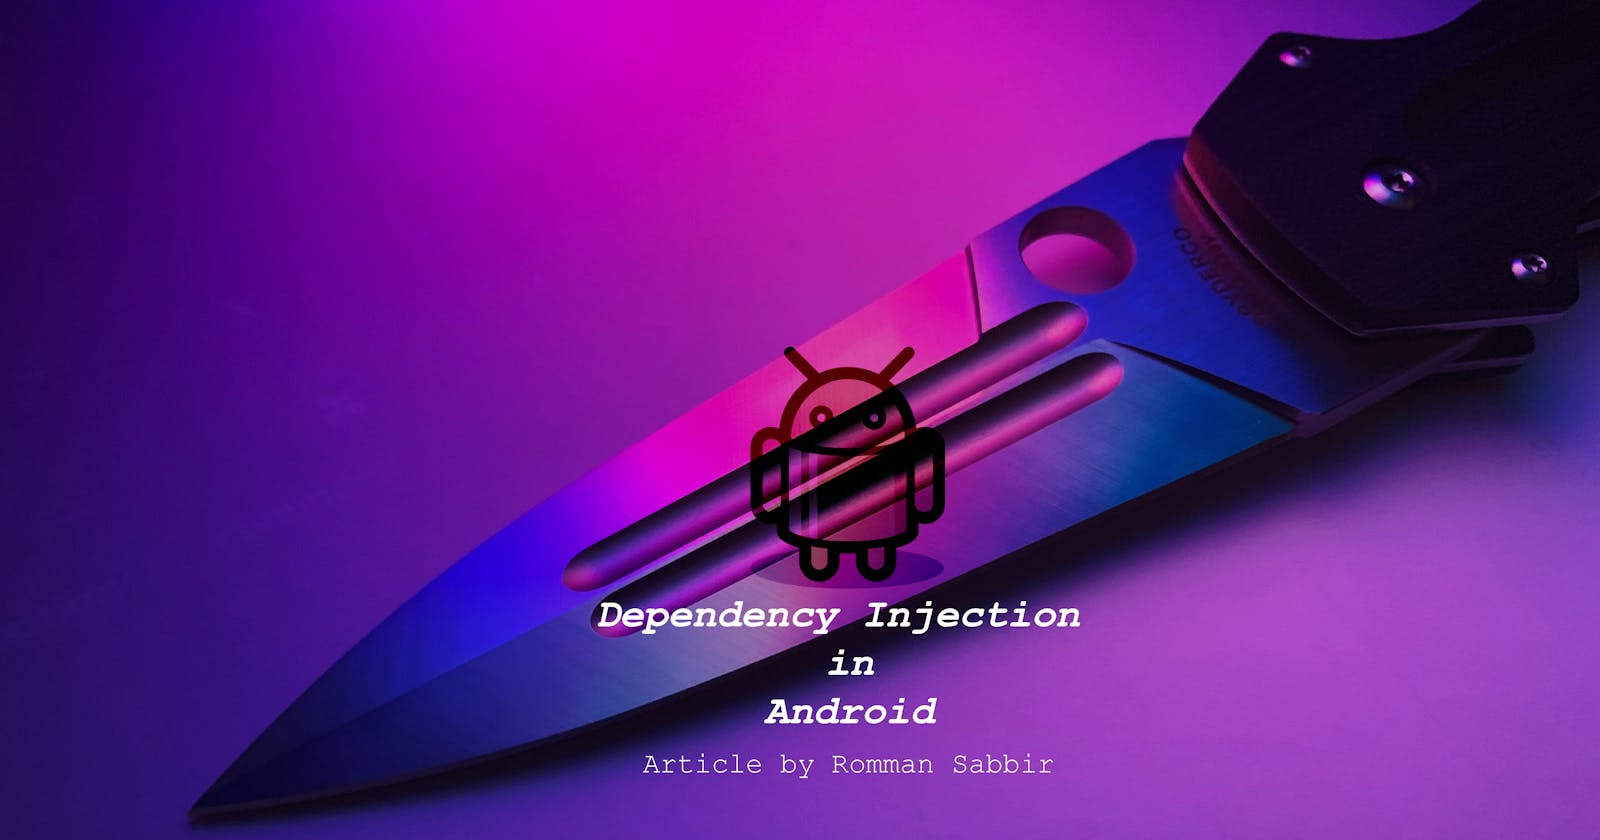 Dependency Injection (Android): Implementation with Examples (Hilt) [PART 3]